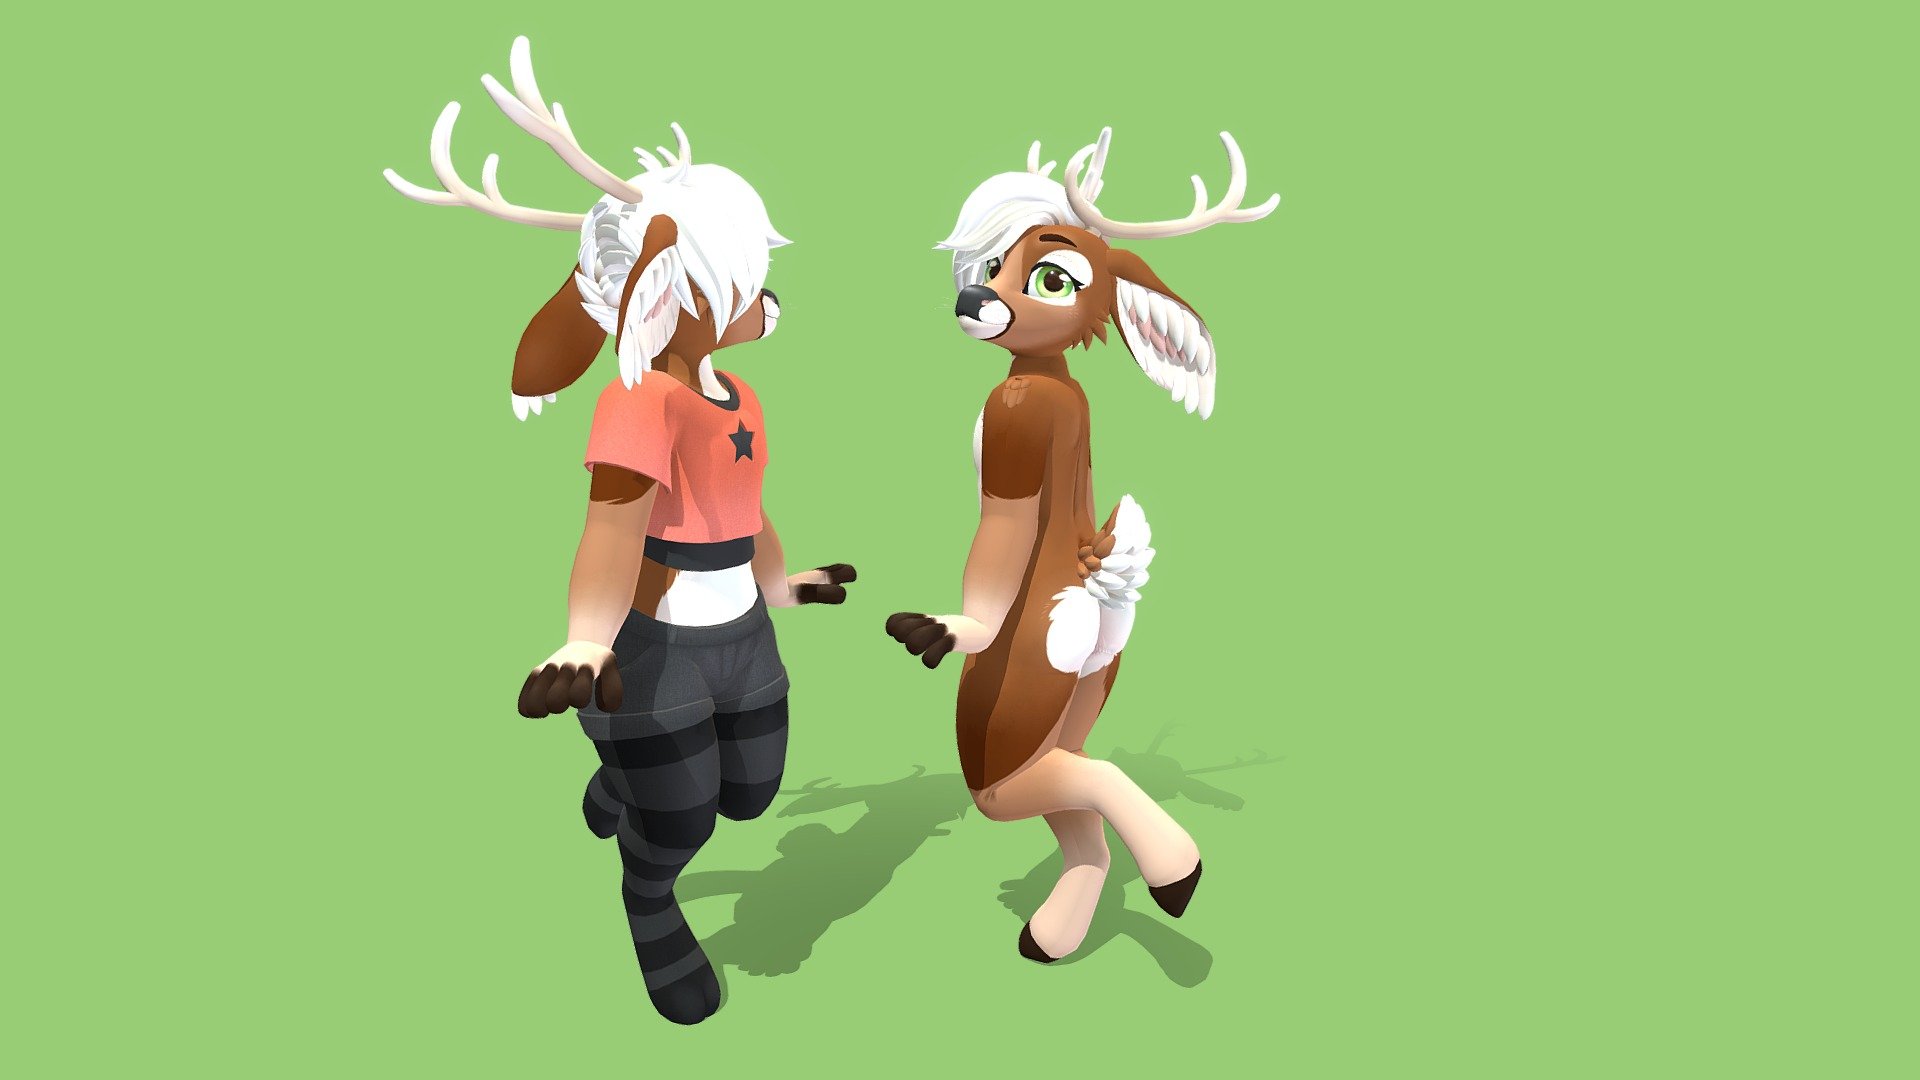 An avatar meant to be used in VRChat! After purchasing it, you are free to privately upload, modify and customize your own buppy avatar c:

You can get it now! at: https://www.furaffinity.net/view/51349461/

Features: • A bunch of emotes • Editable .psd files • Pre-set up for VRChat with Physbones • 3 pre-made textures • A little shirt, pair of shorts, undies and socks, all with editable .psd files • Body emotes like ears down and tail wag - [$] Little Deer VRChat Avatar - 3D model by Meelo 3d model